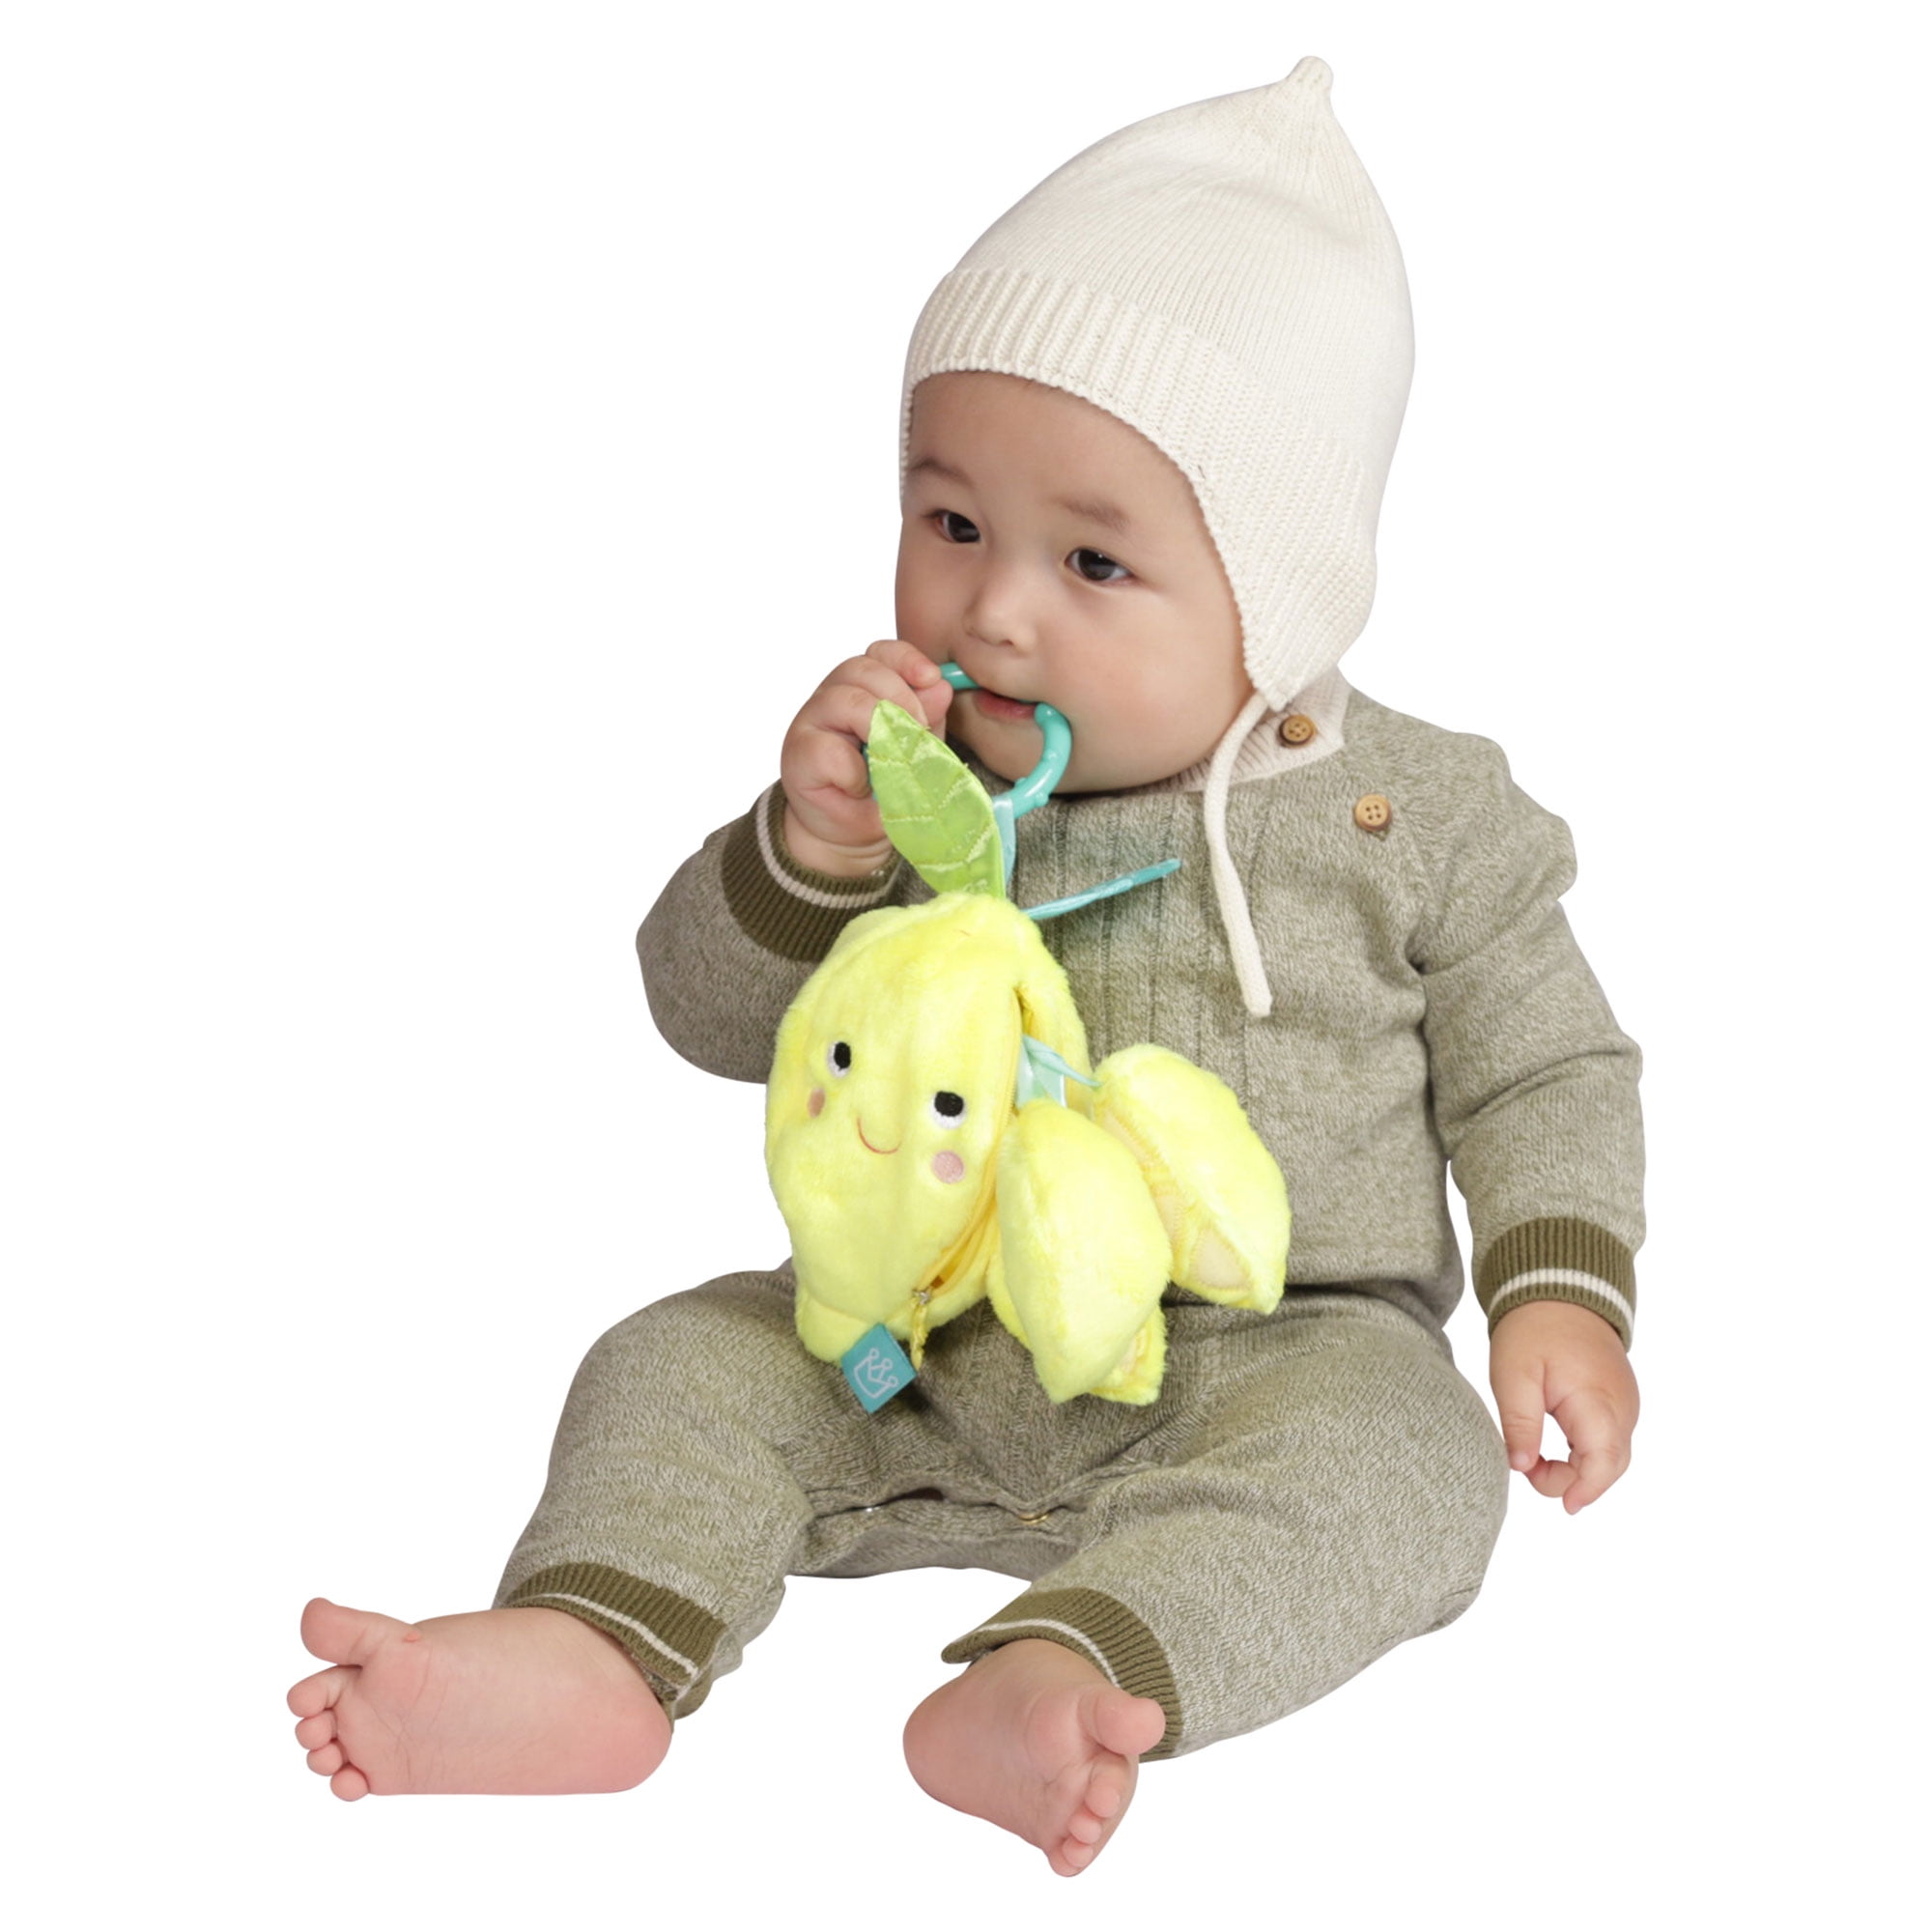 Manhattan Toy Mini-Apple Farm Lemon Baby Travel Toy with Rattle Crinkle Fabric & Teether Clip-on Attachment Squeaker 